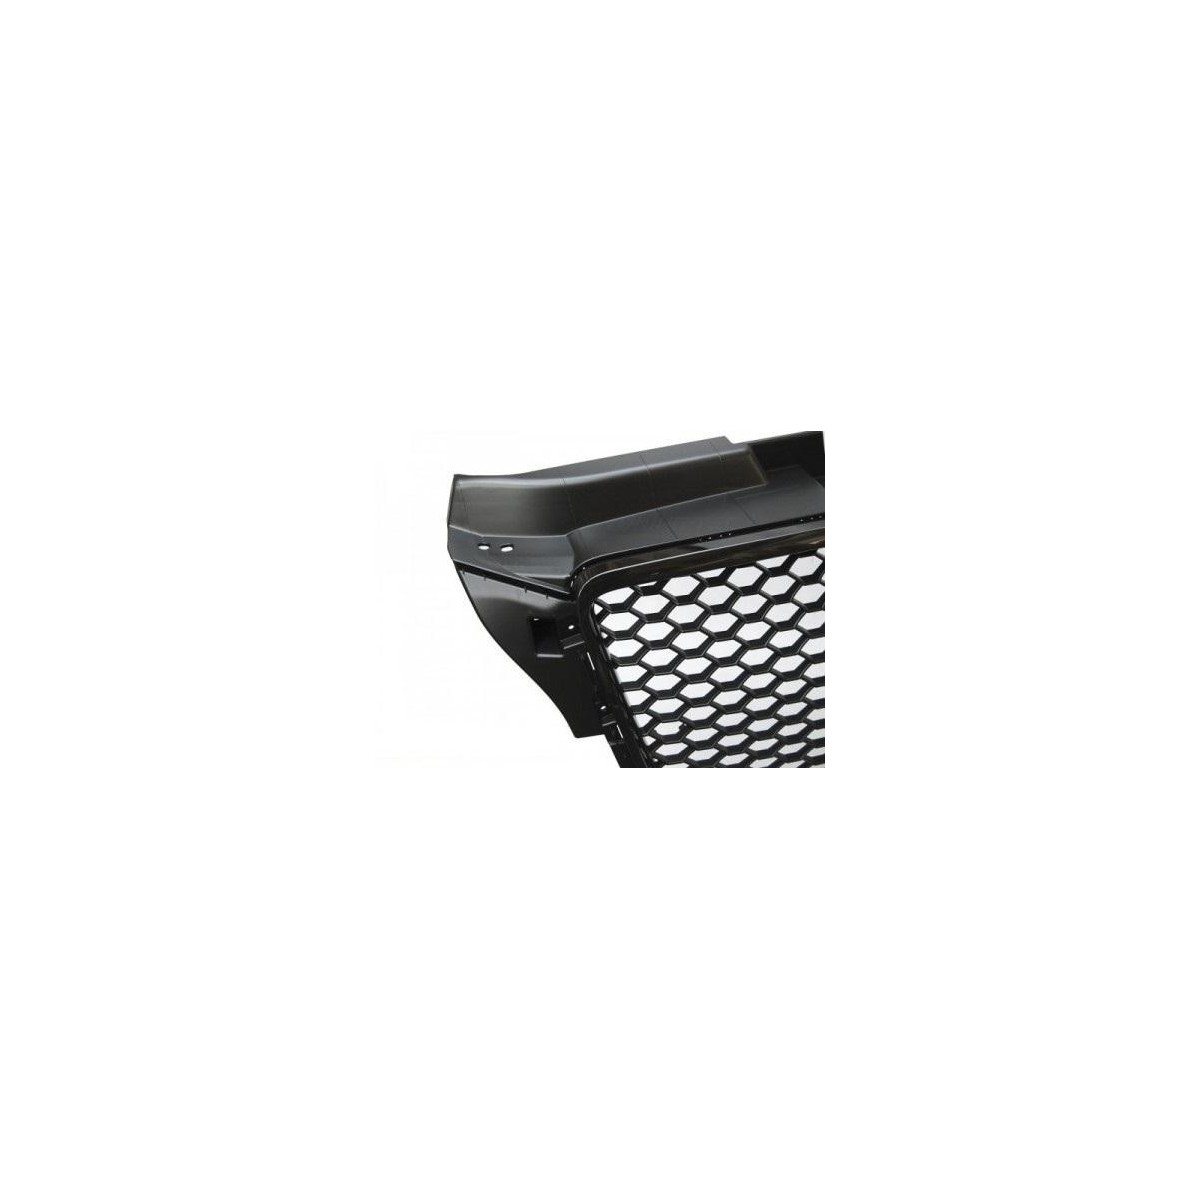 GRILL AUDI AA3 08-12 RS LOOK GLOSSY BLACK